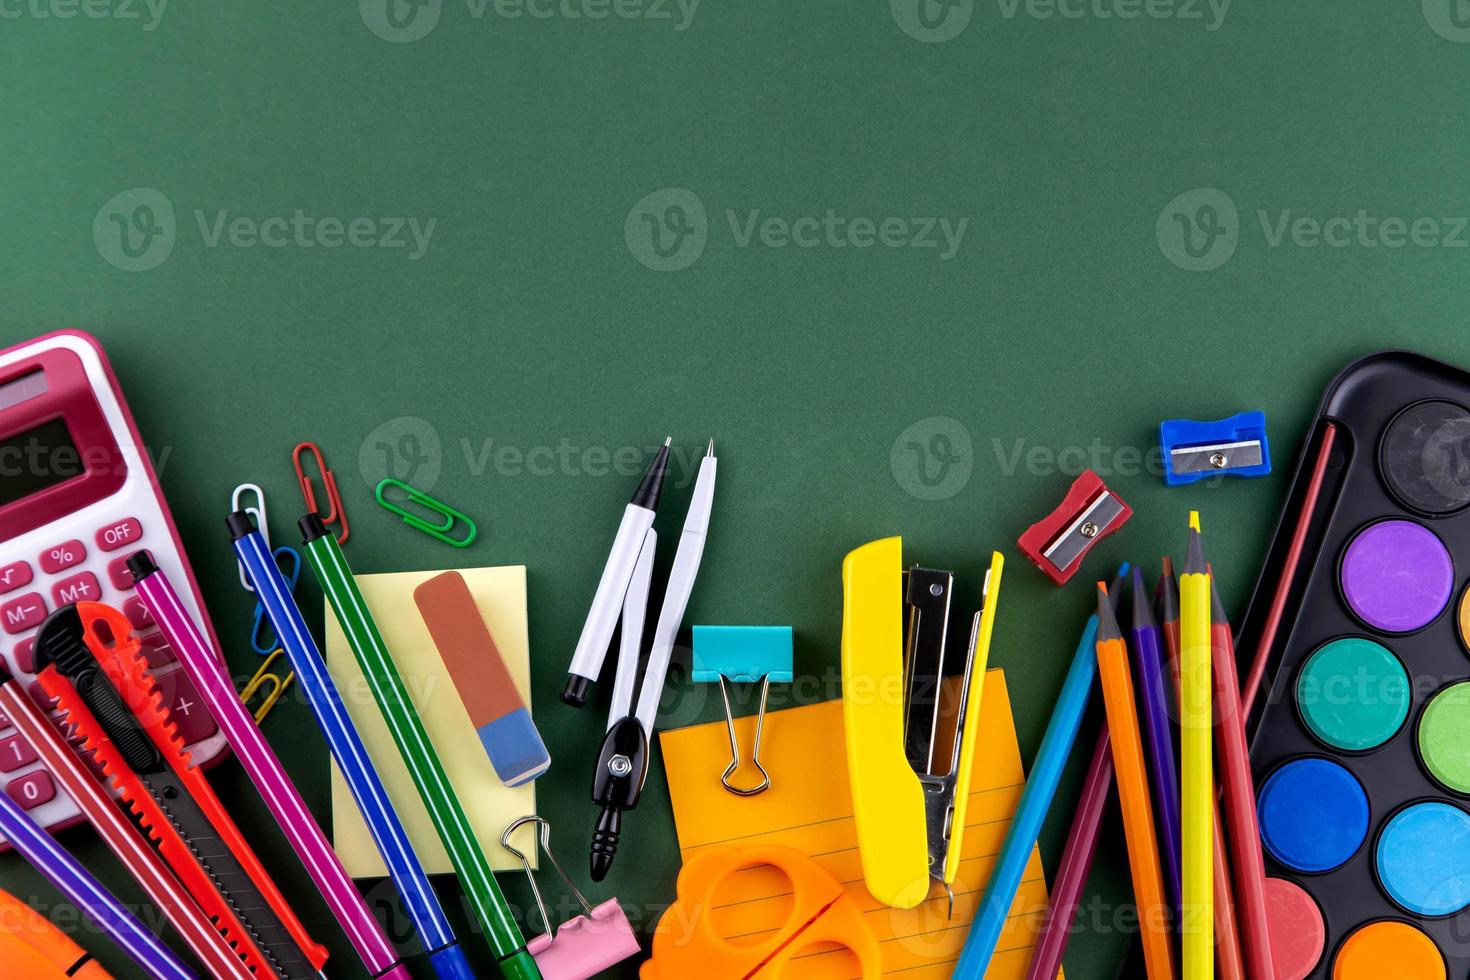 https://static.vecteezy.com/system/resources/previews/002/434/830/non_2x/school-office-supplies-stationery-on-a-green-background-desk-with-copy-space-photo.jpg